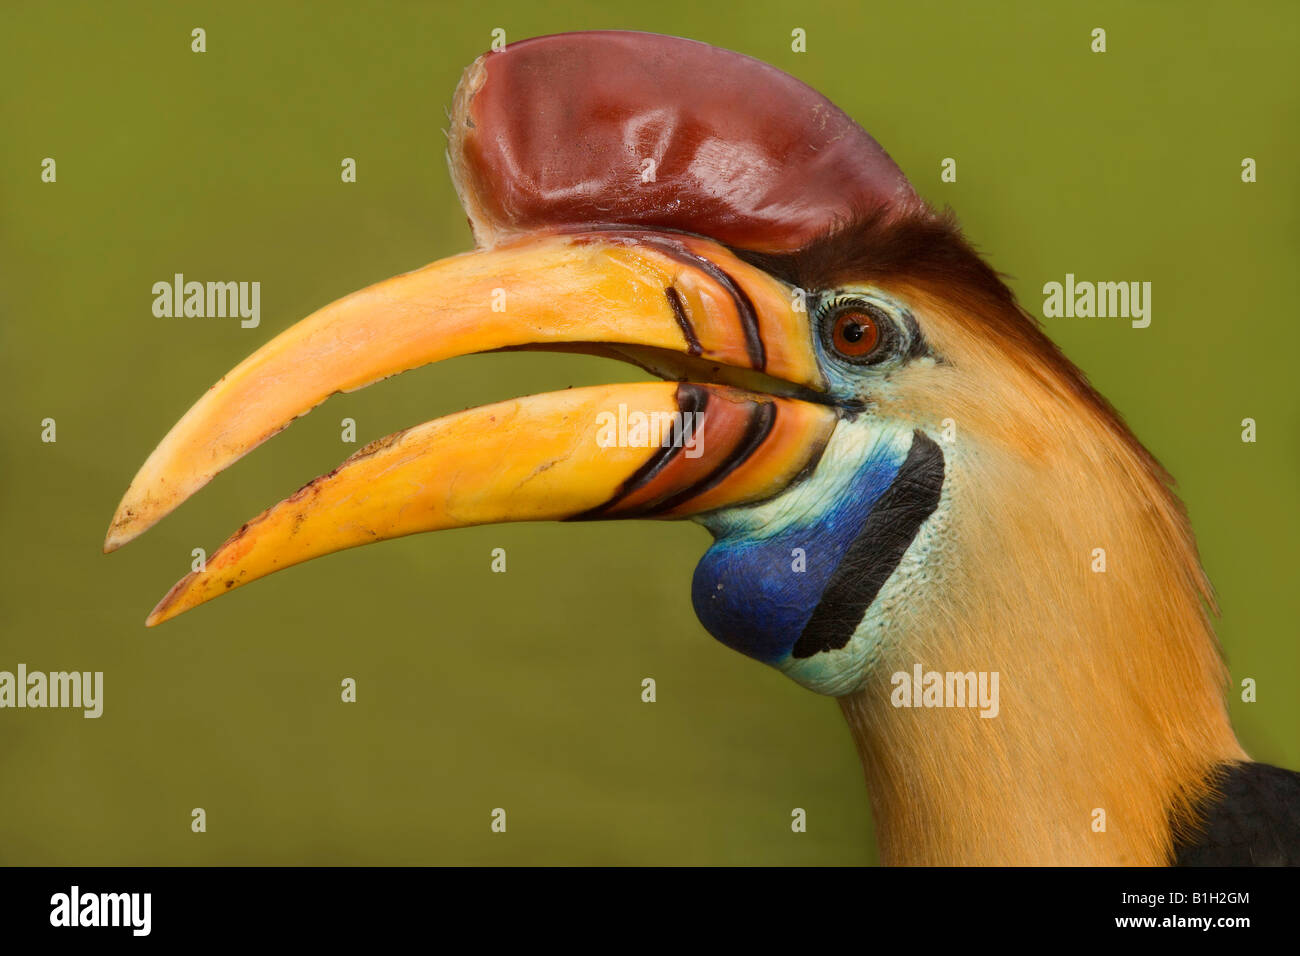 Close-up of a Sulawesi Red-Knobbed hornbill (Aceros cassidix) Stock Photo